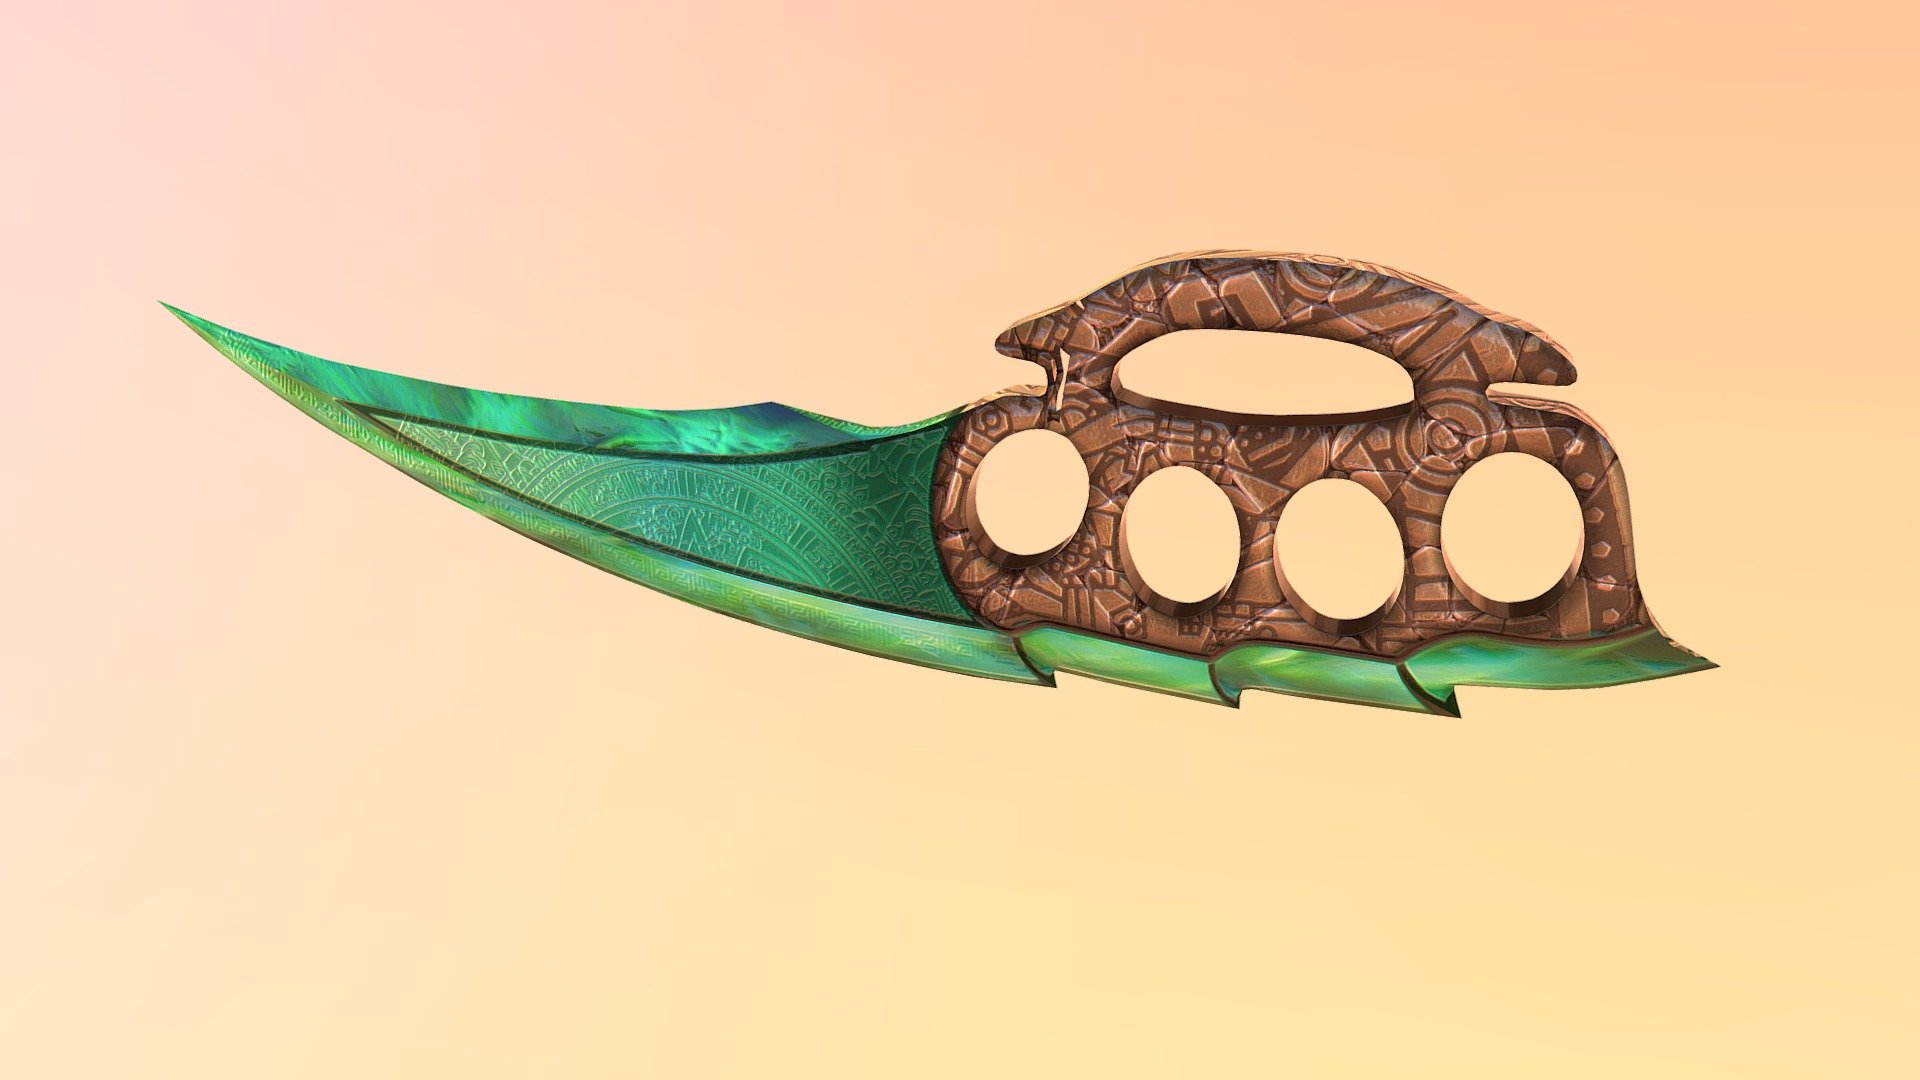 AZTEC KNIFE VGO submission for knuckle knife design - Knuckle Knife - 3D model by NorGlace (@glaciuscreations) 3d model